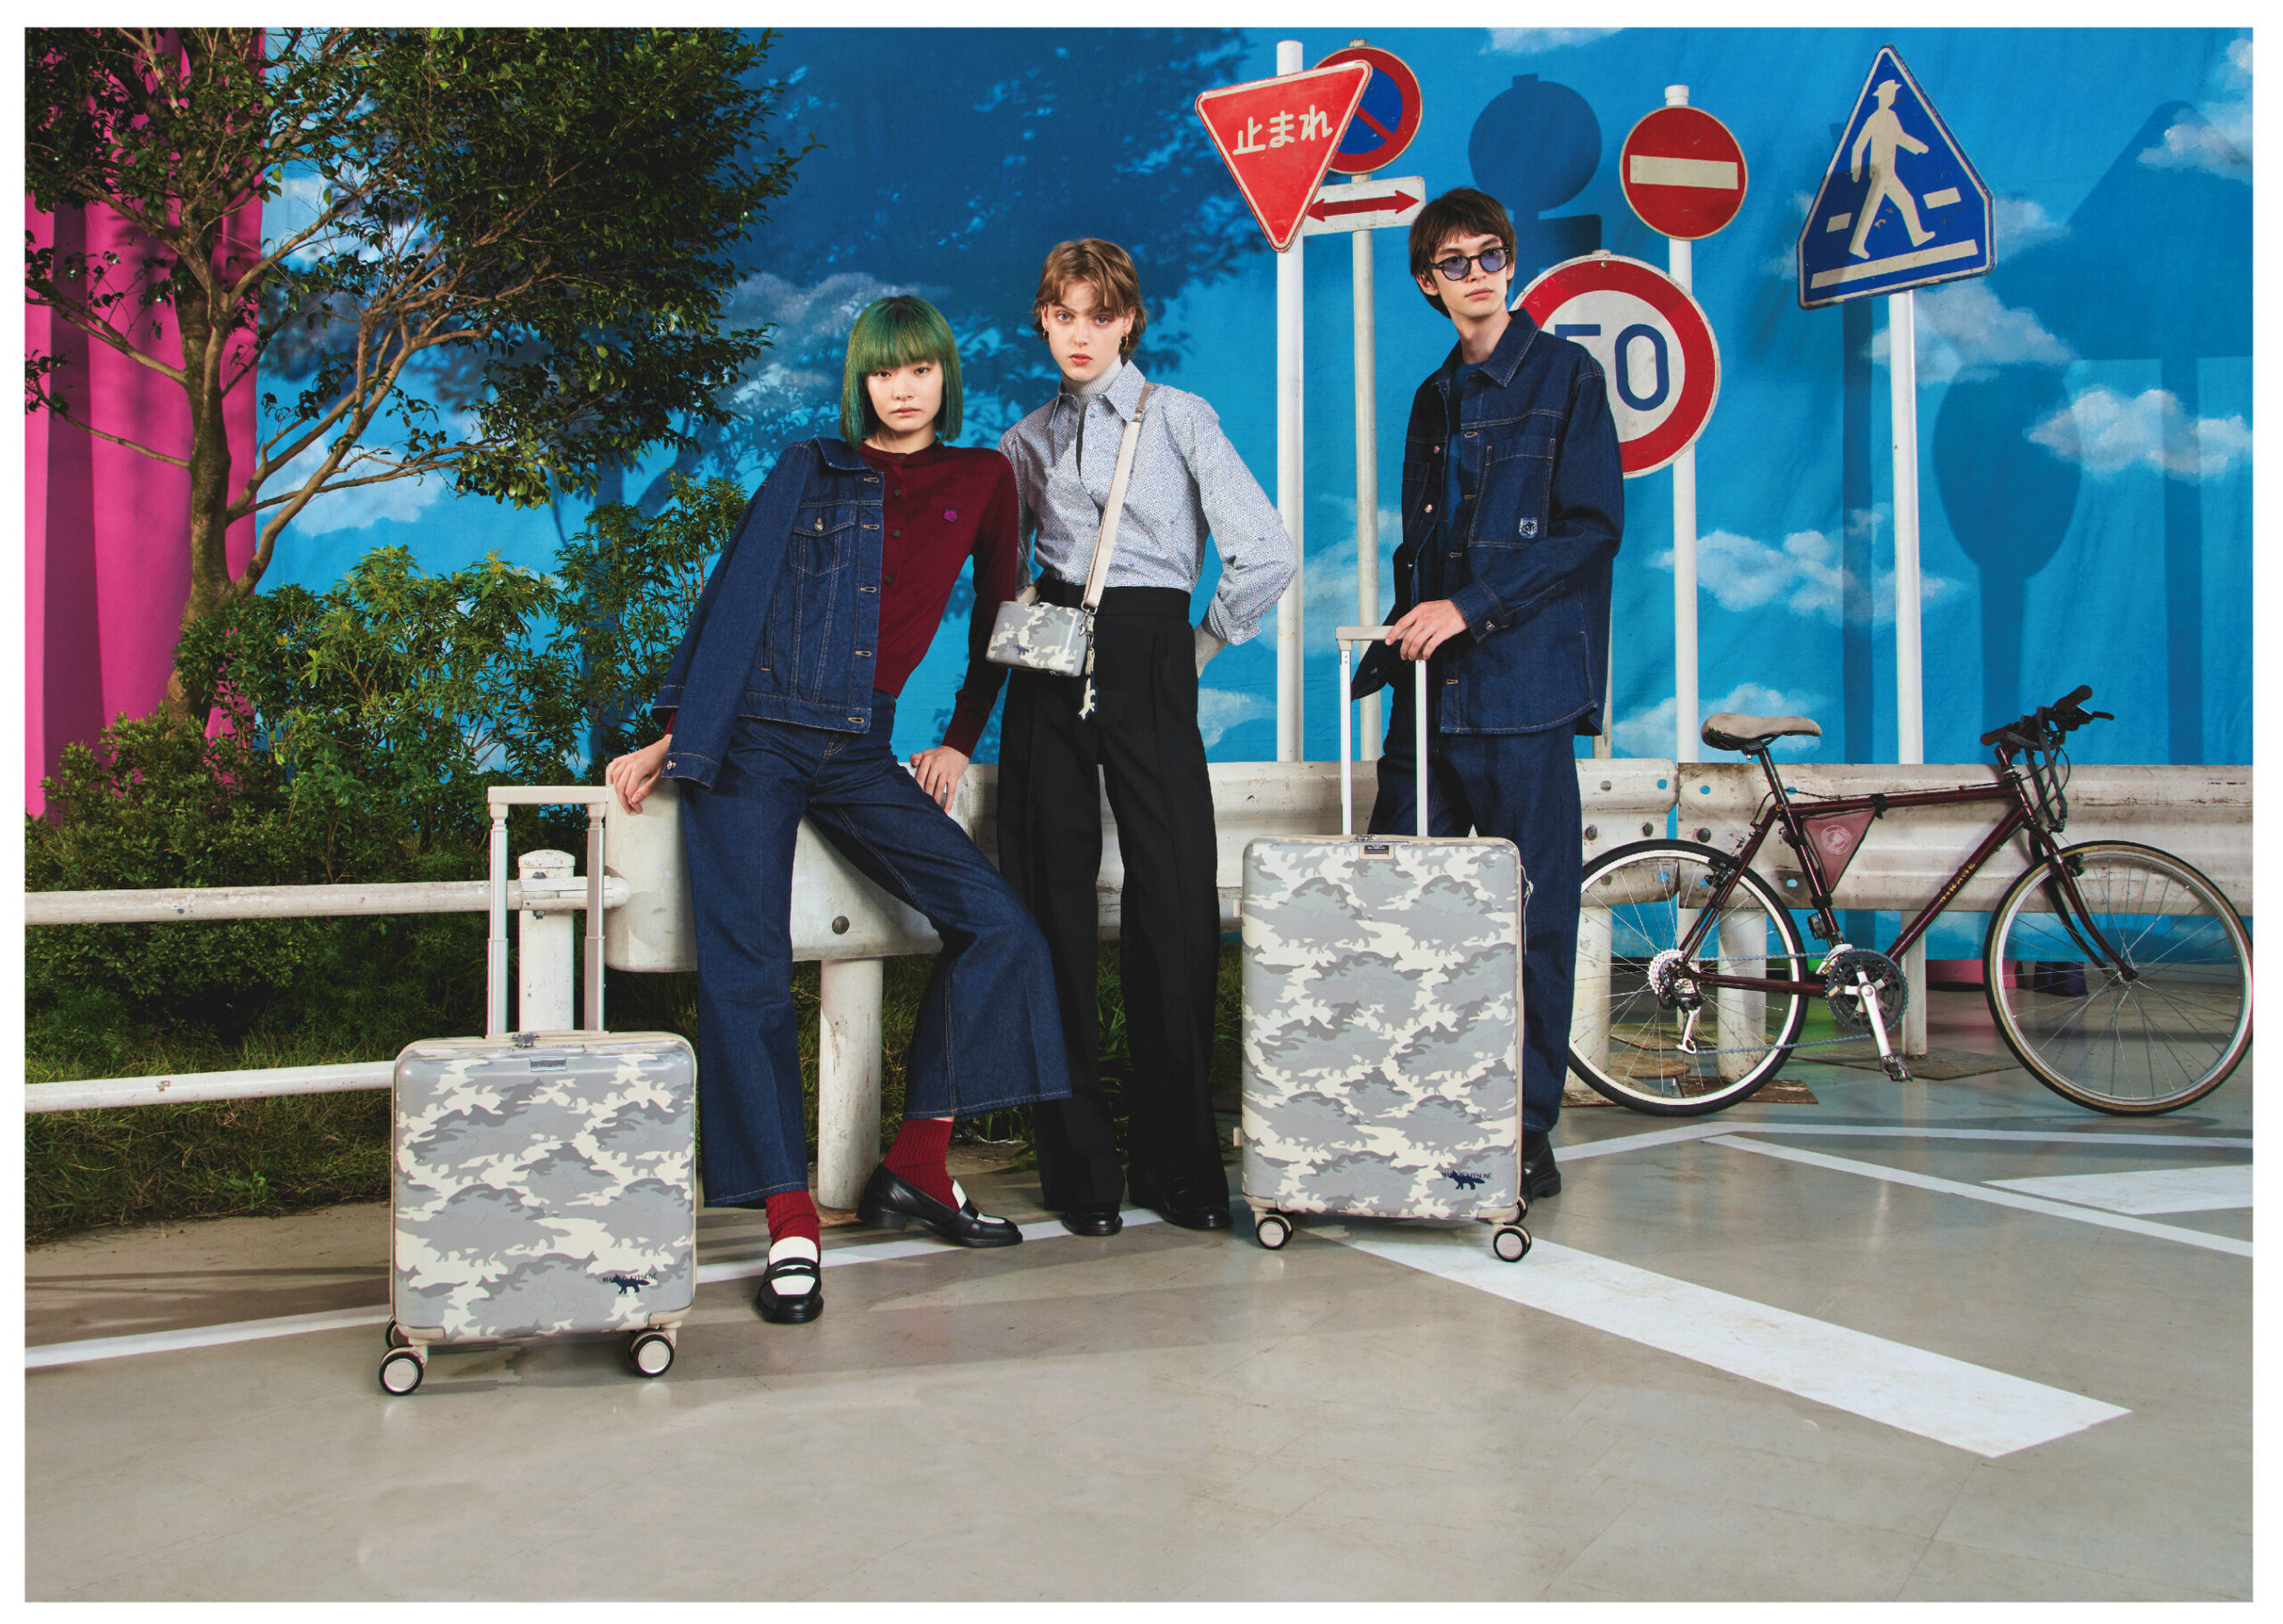 German luggage lotharios Samsonite has teamed up with fashion brand Maison Kitsuné to create a unique collection merging practical luggage and travel accessories with Parisian cool.